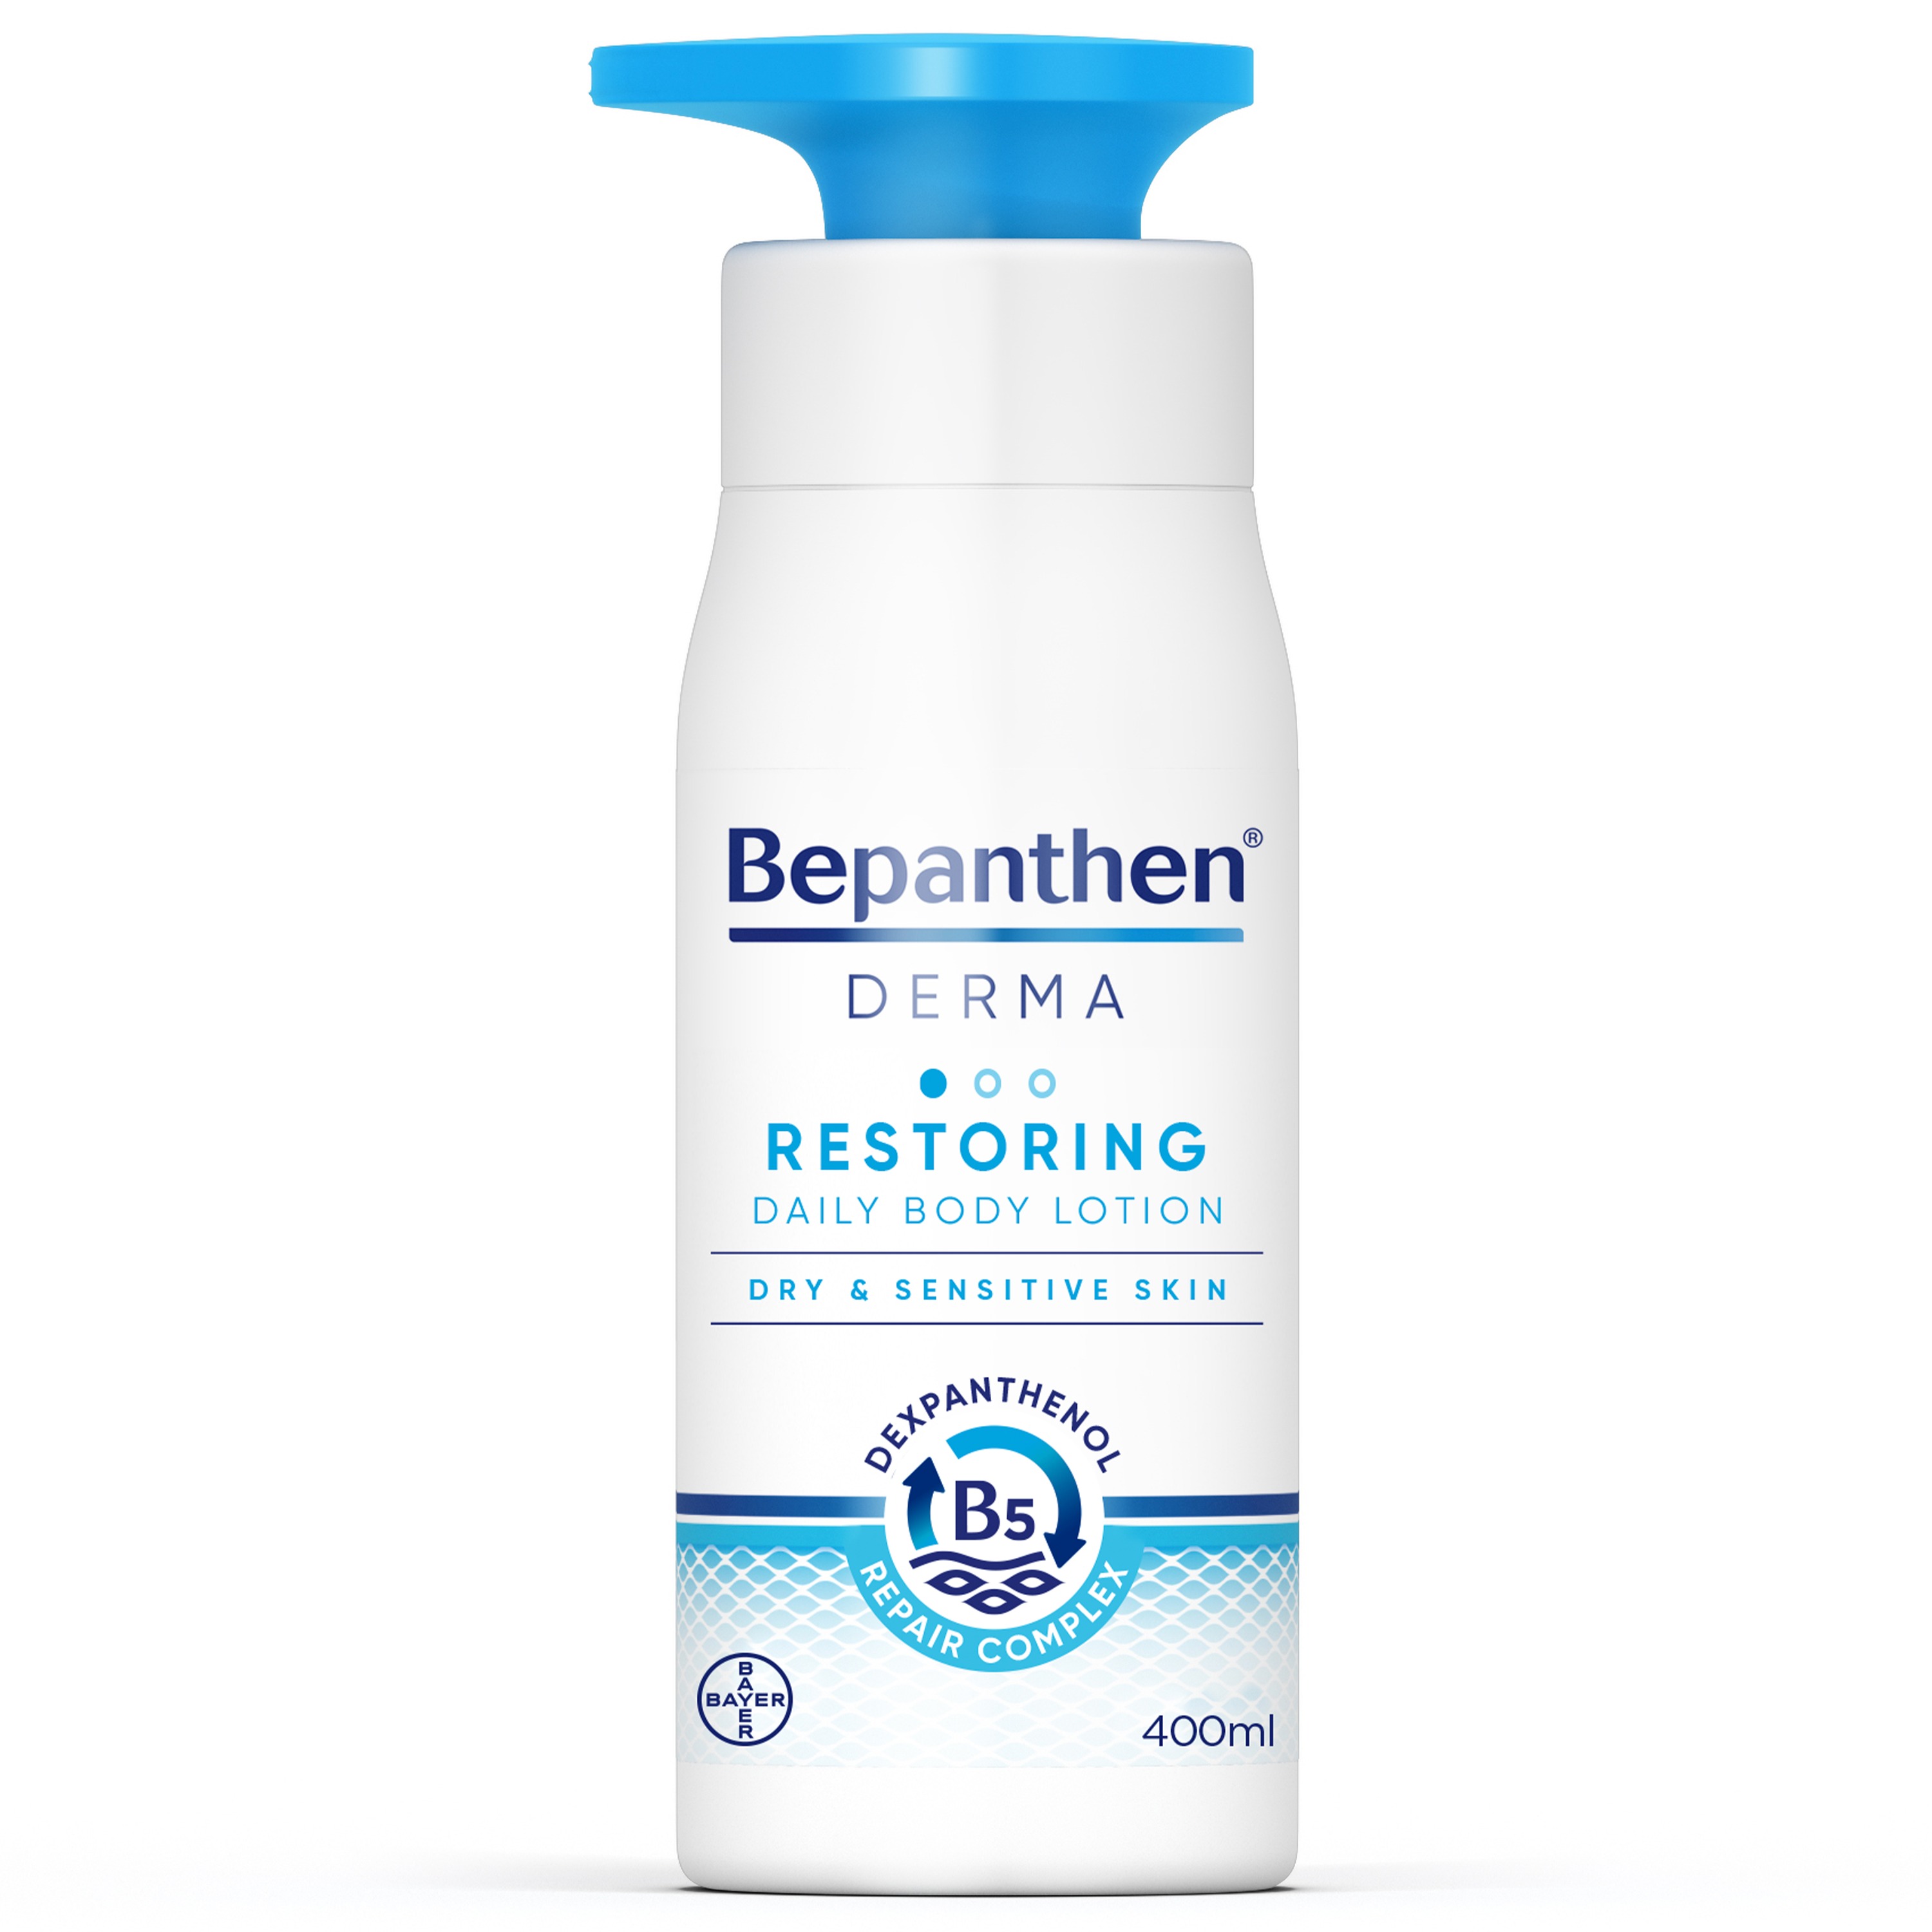 Product Image for Bepanthen® DERMA Restoring Daily Body Lotion 400ml